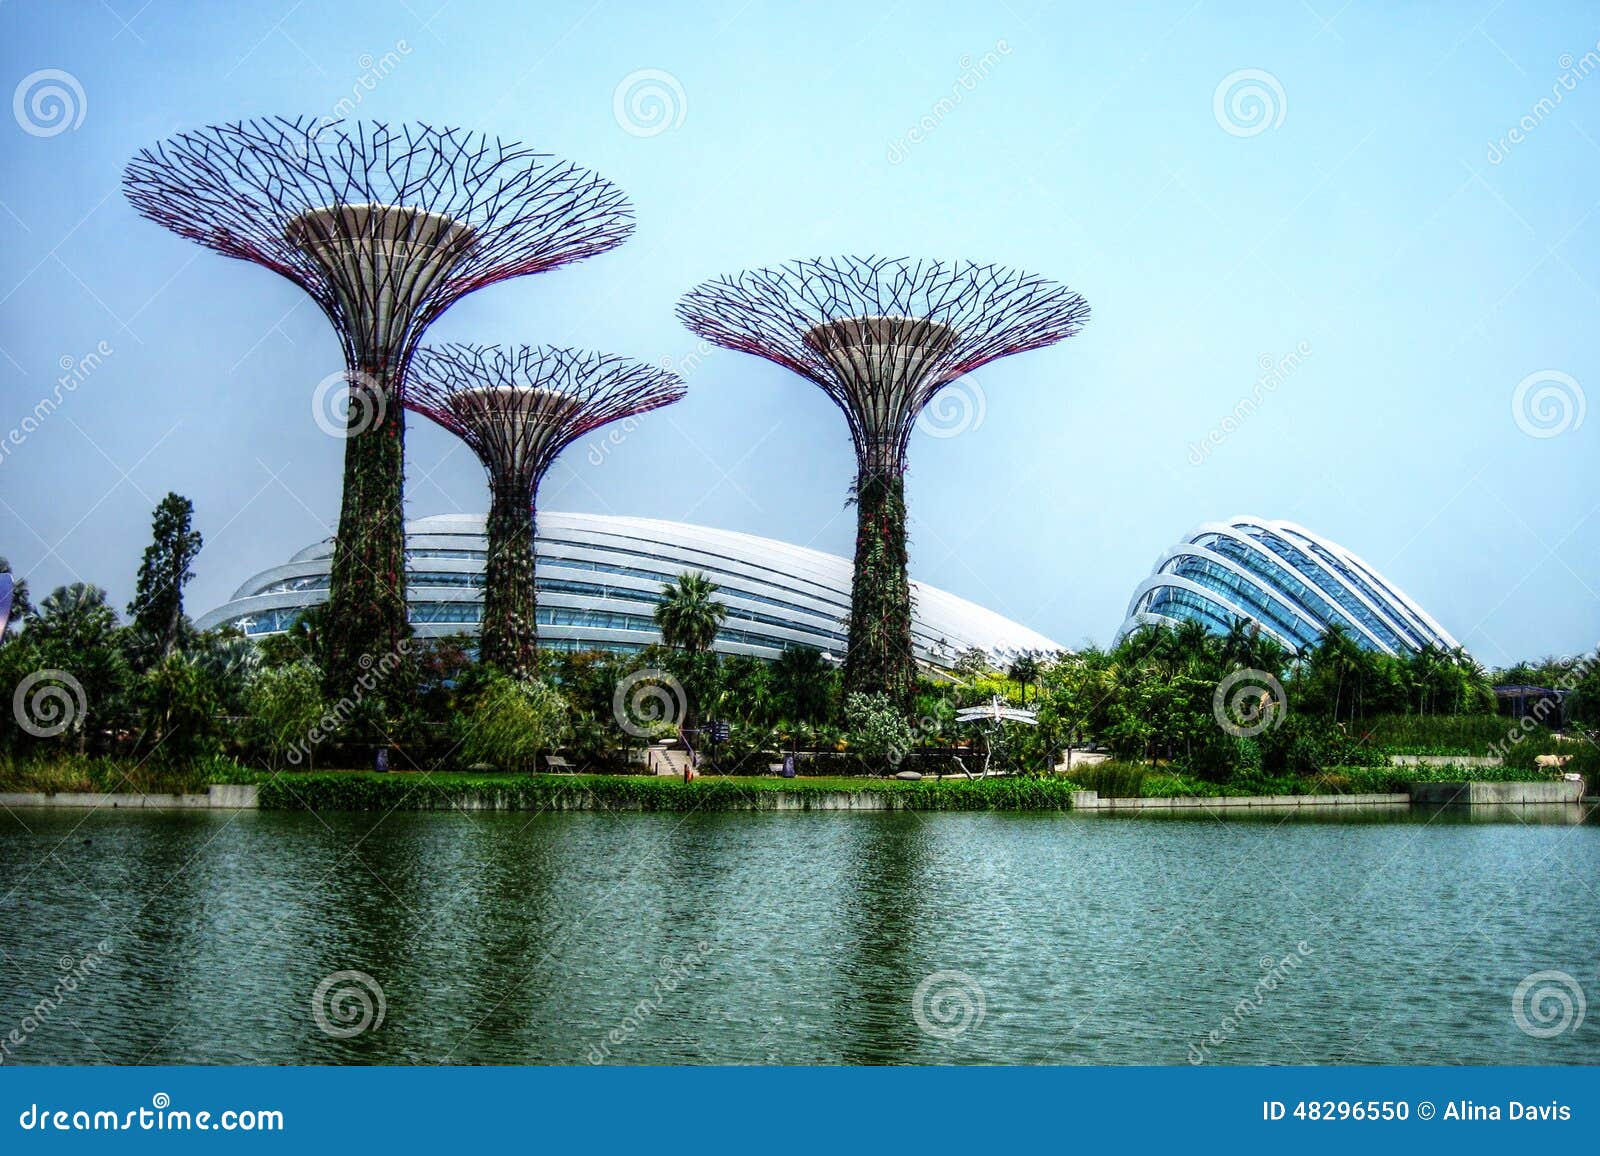 supertrees greenhouse and dragonfly lake - singapore - gardens by the bay